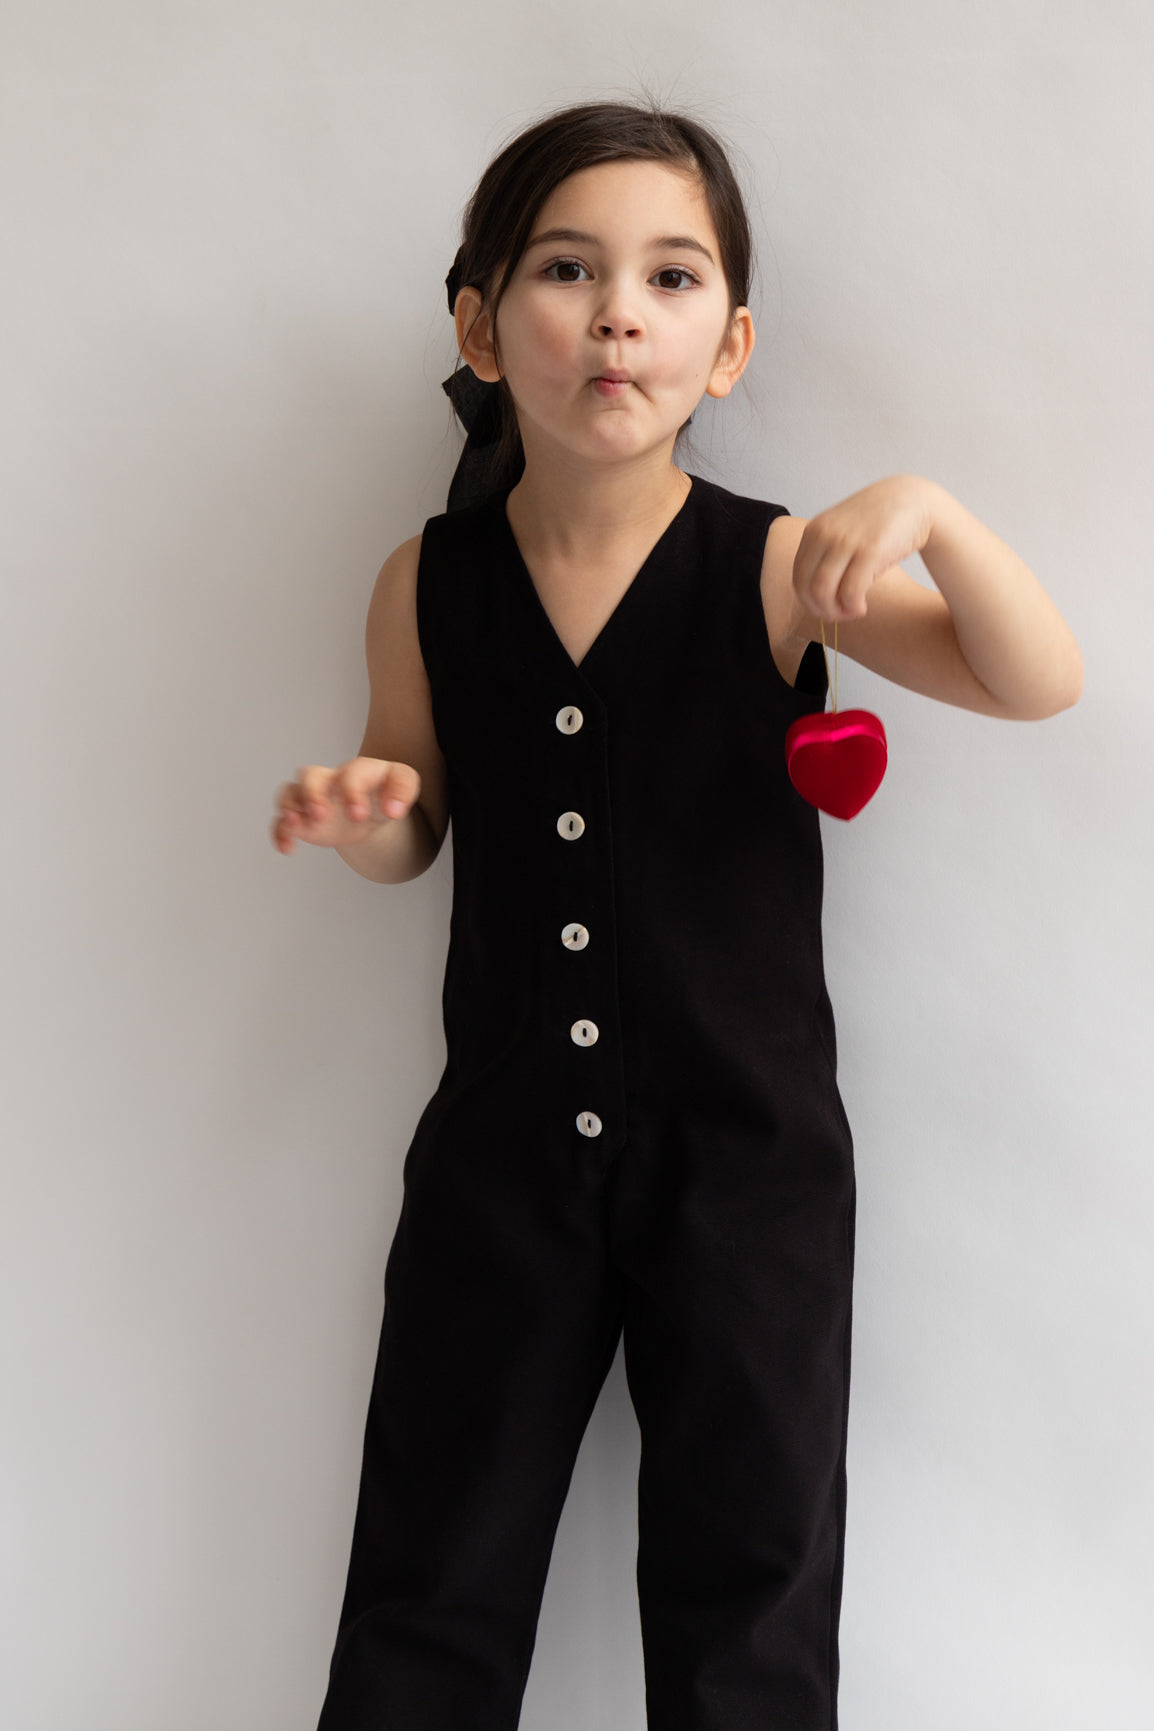 Black color Kids Mini Jumpsuit overall workwear cotton canvas with pockets 5 buttons v-neck OEKO-TEX sustainable clothes handmade